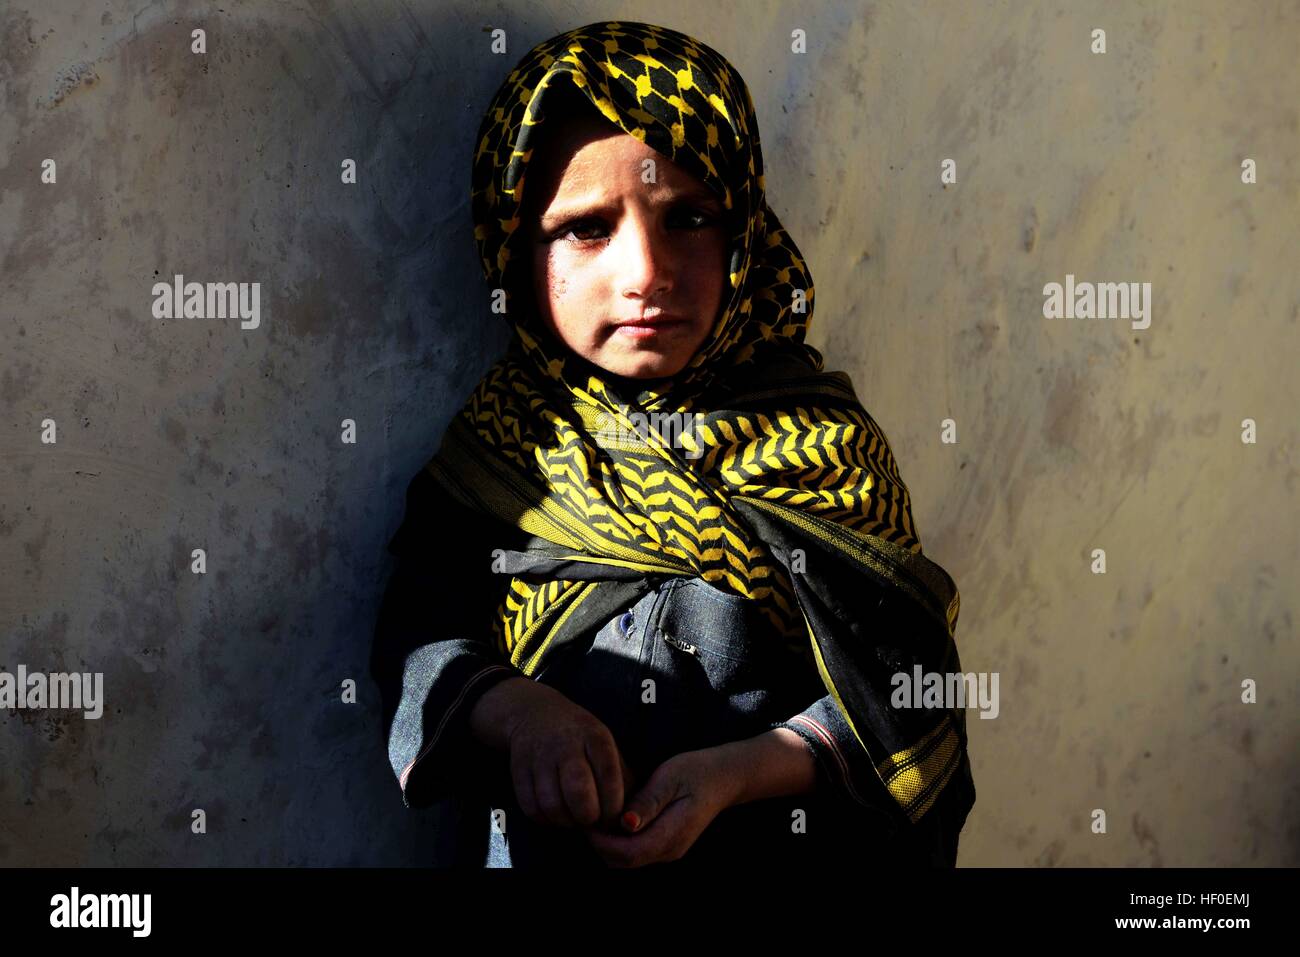 Qalat, Afghanistan's Zabul province. 26th Dec, 2016. An Afghan displaced child stands outside her tent in Qalat city, capital of southern Afghanistan's Zabul province, Dec. 26, 2016. More than one million people have to flee their home due to conflicts in the country, according to officials. © Sanaullah Seiam/Xinhua/Alamy Live News Stock Photo